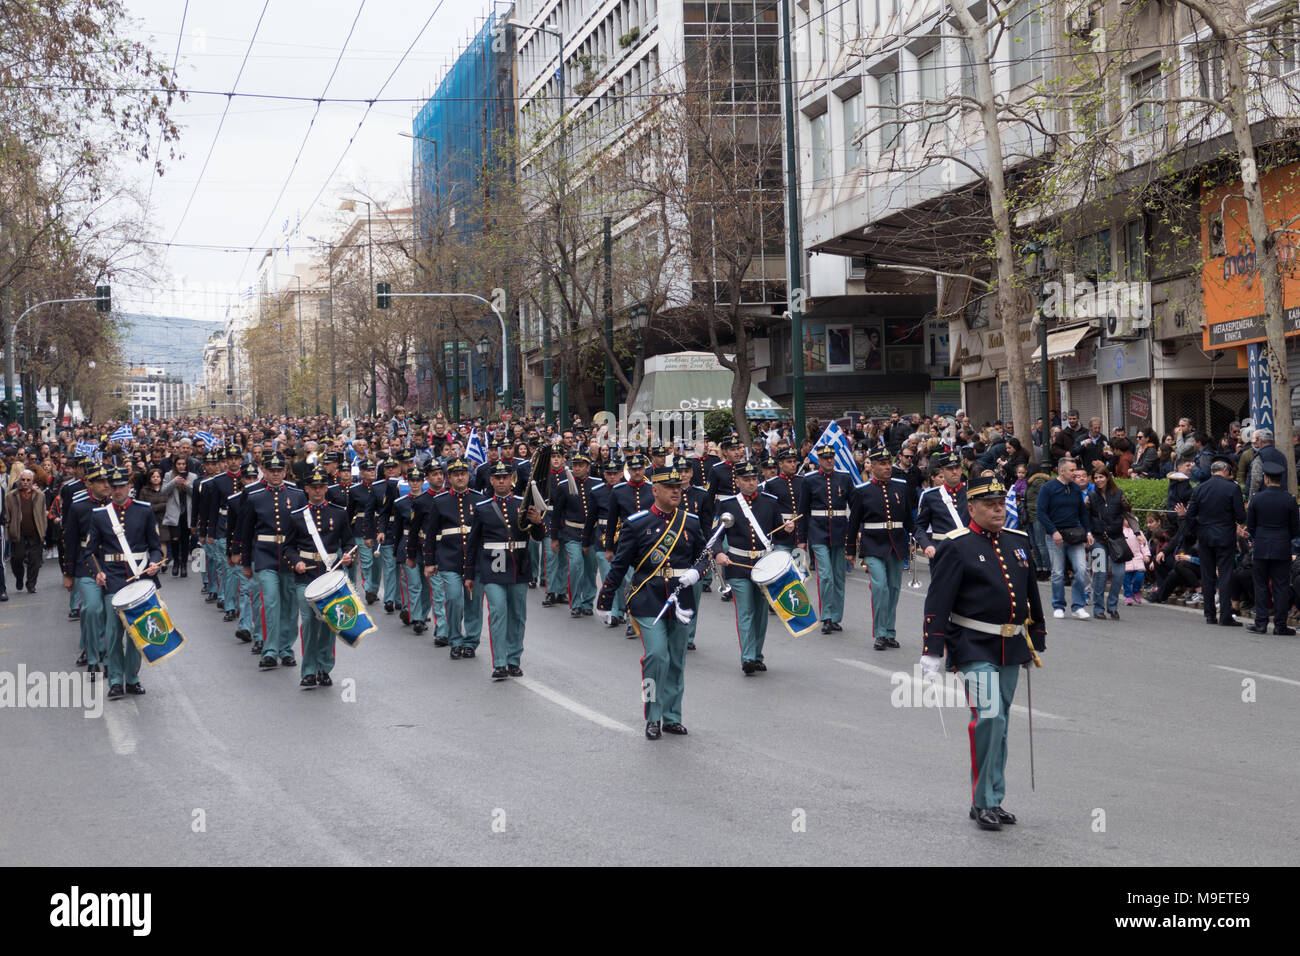 Athens, Greece. 25th March 2018. Parade of military and other on the occasion of the celebration of the Greek Independence day in central Athens. Credit: Rainboweyes/Alamy Live News Stock Photo